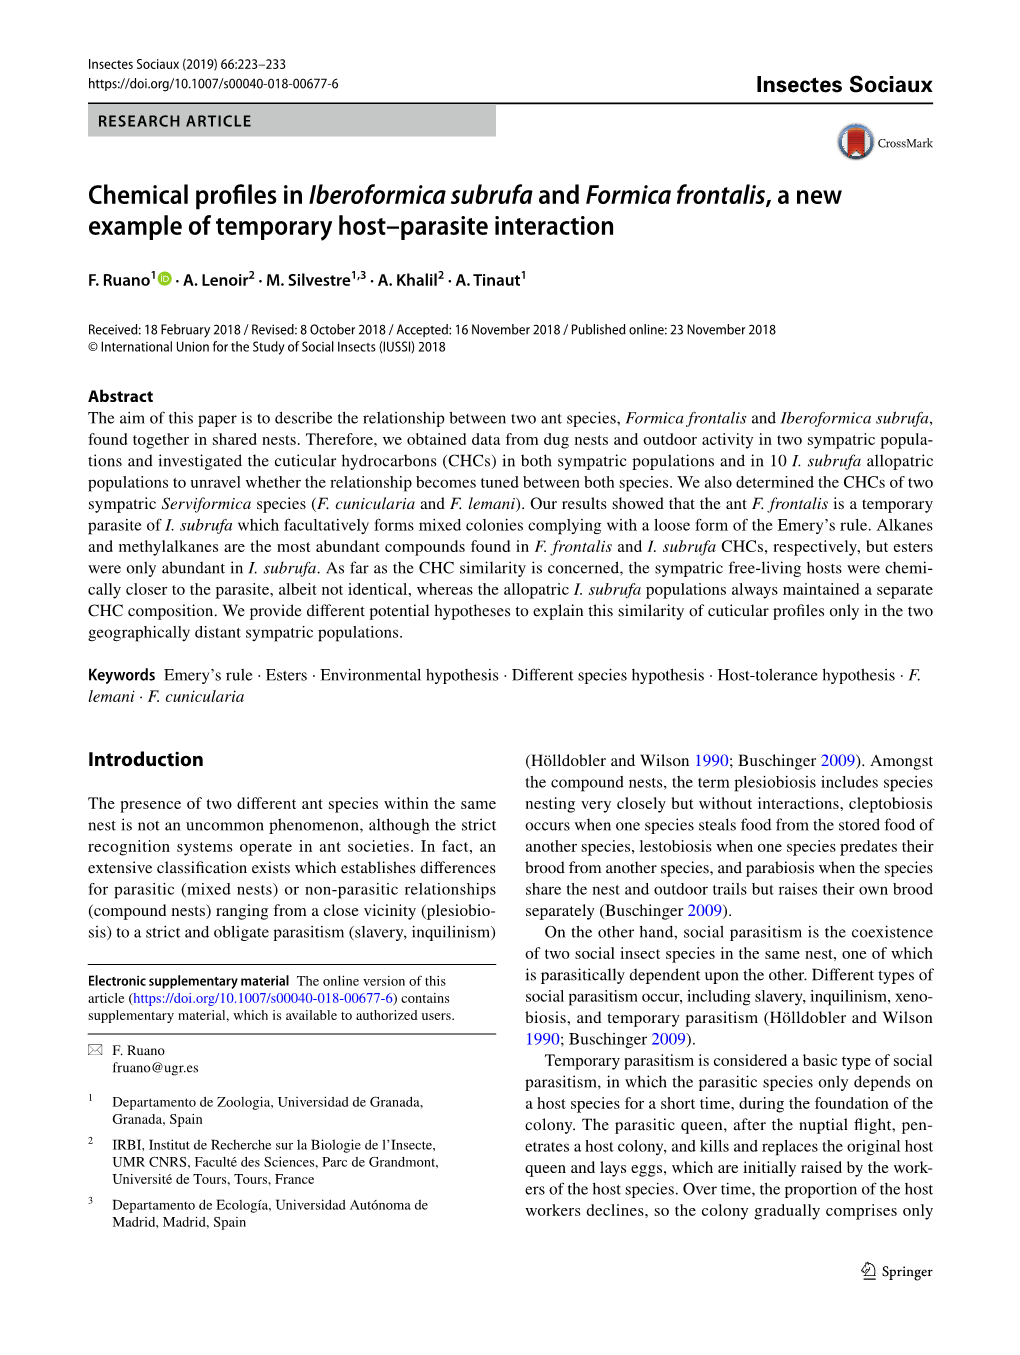 Chemical Profiles in Iberoformica Subrufa and Formica Frontalis, a New Example of Temporary Host–Parasite Interaction